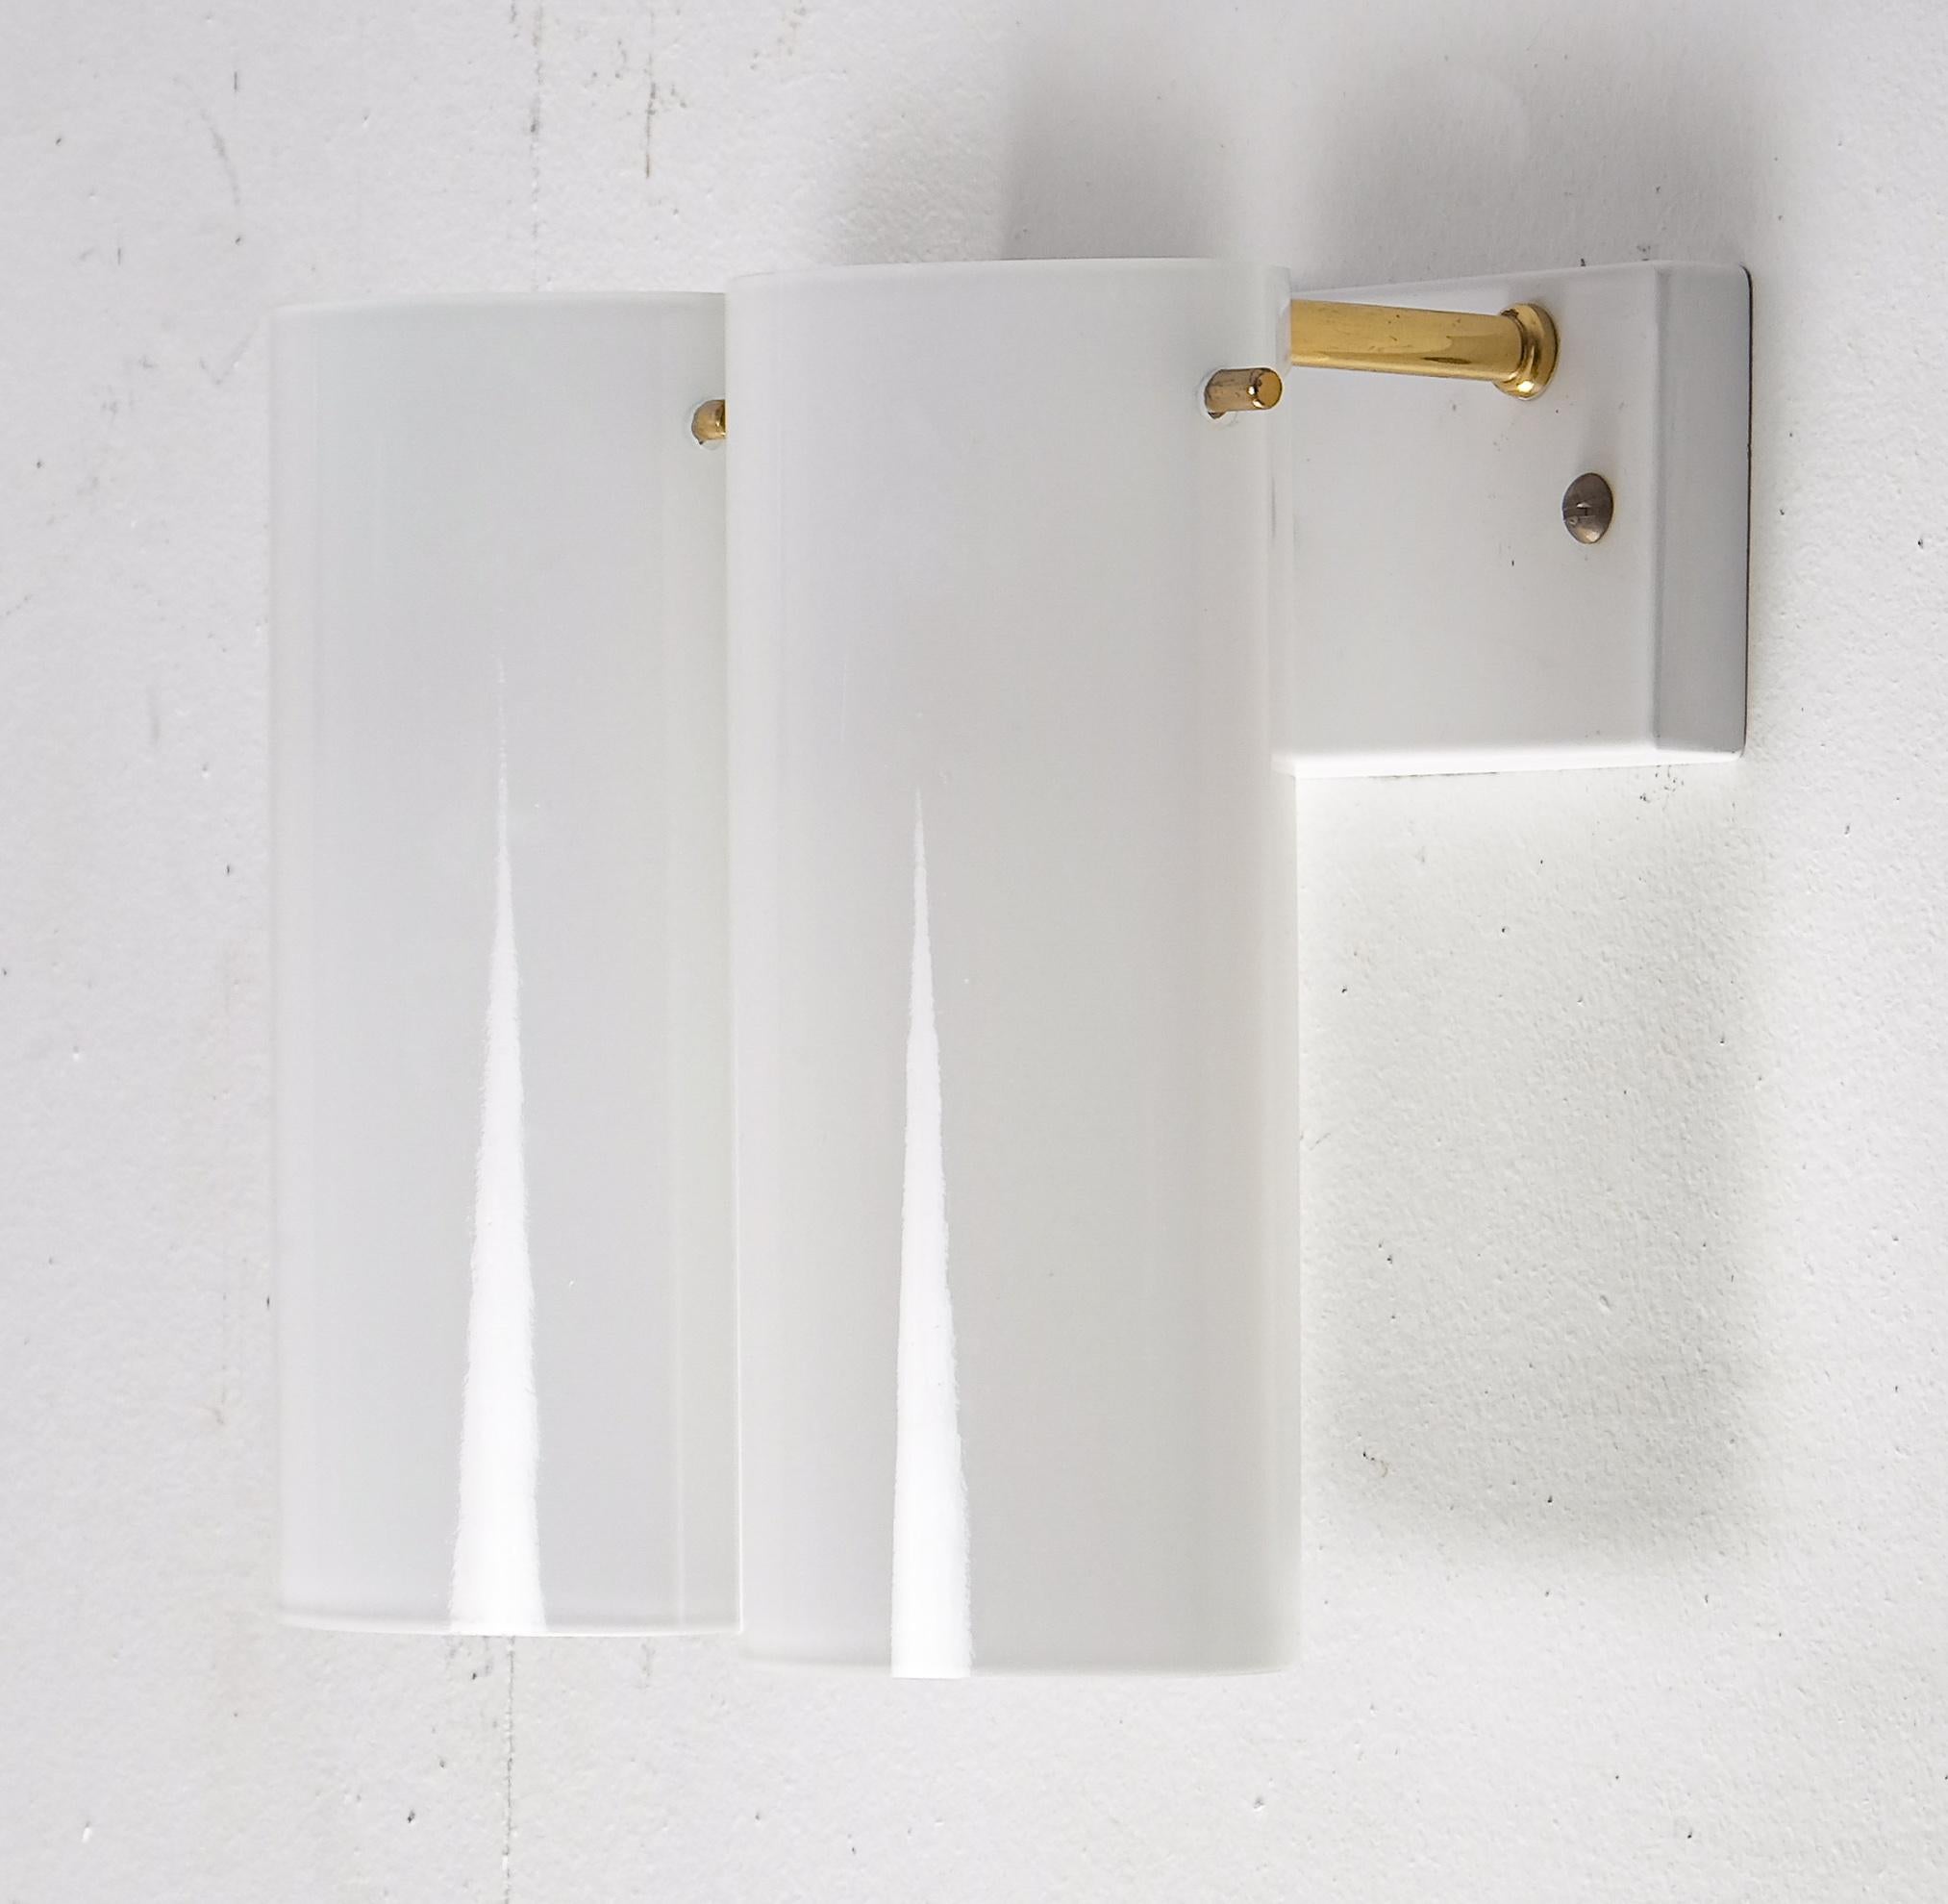 Rare model. Set of 10 available, listed price is for a single wall lamp.
2-armed, opaline glass and brass. Produced by Fagerhults, late 1960s.